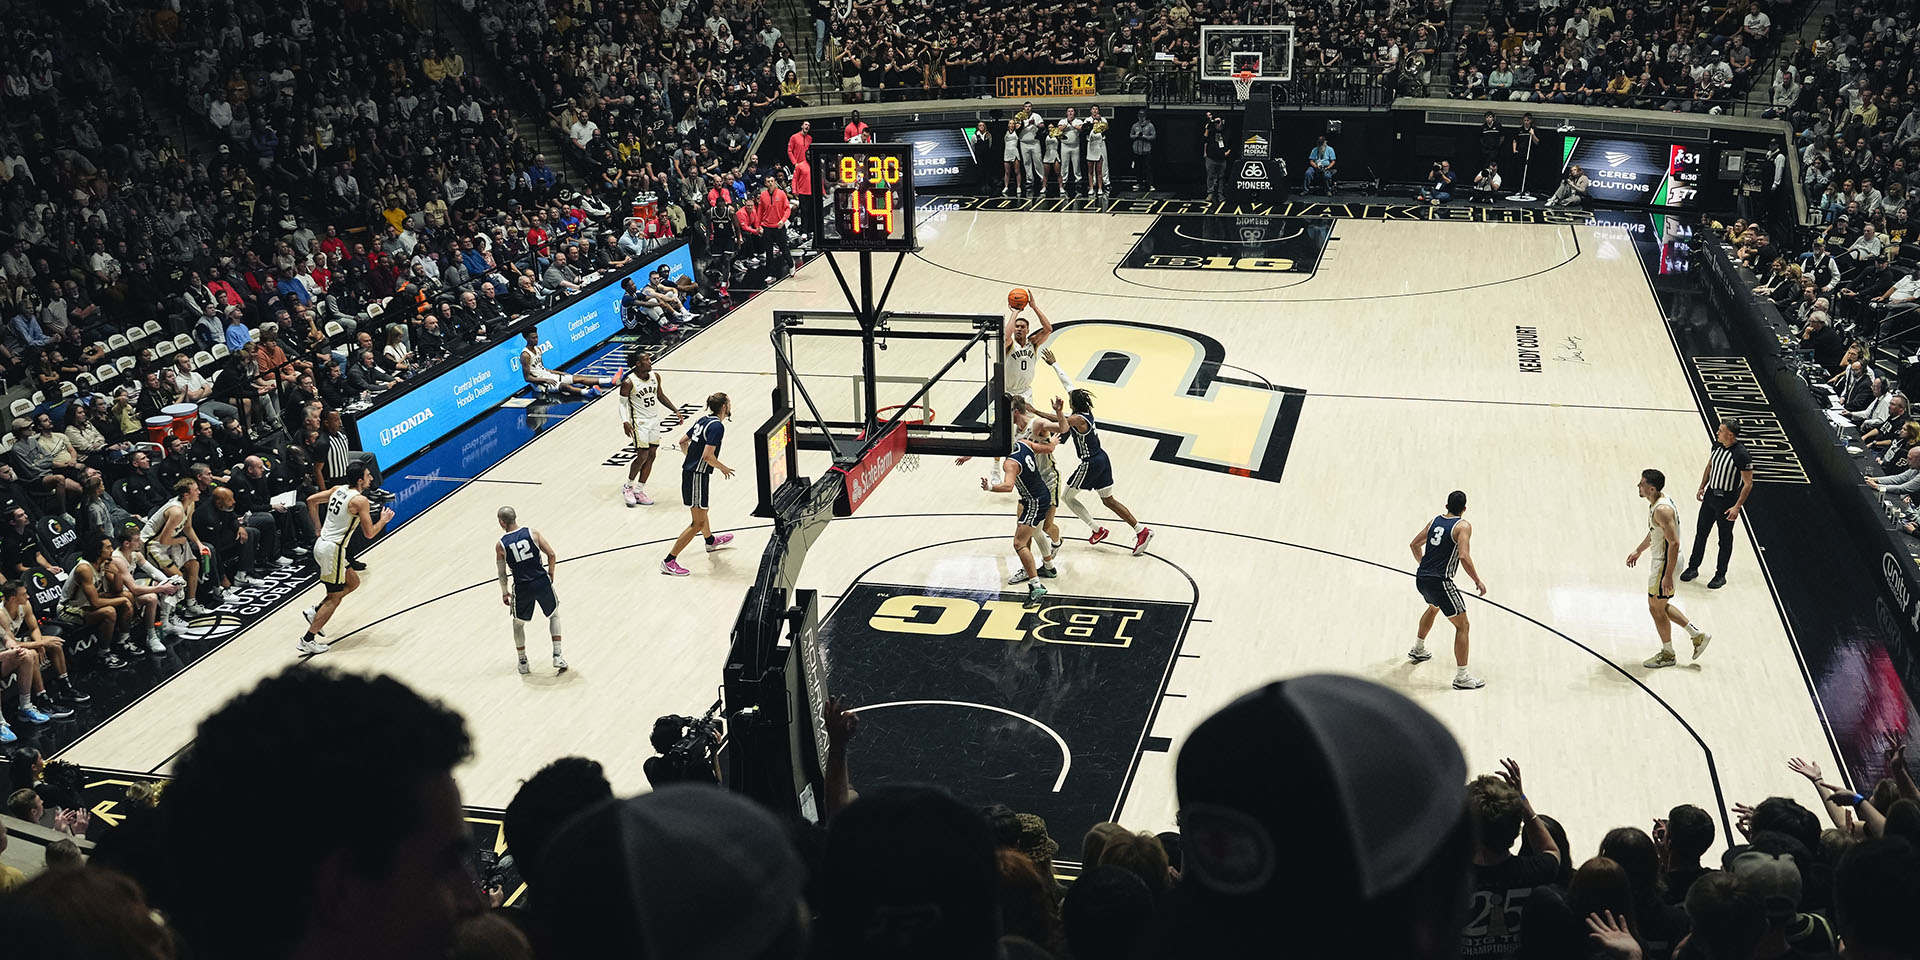 Purdue Boilermakers Basketball team is seen on Nov 4, 2023 at University of Michigan during a game against Grace College in Ann Arbor, MI.